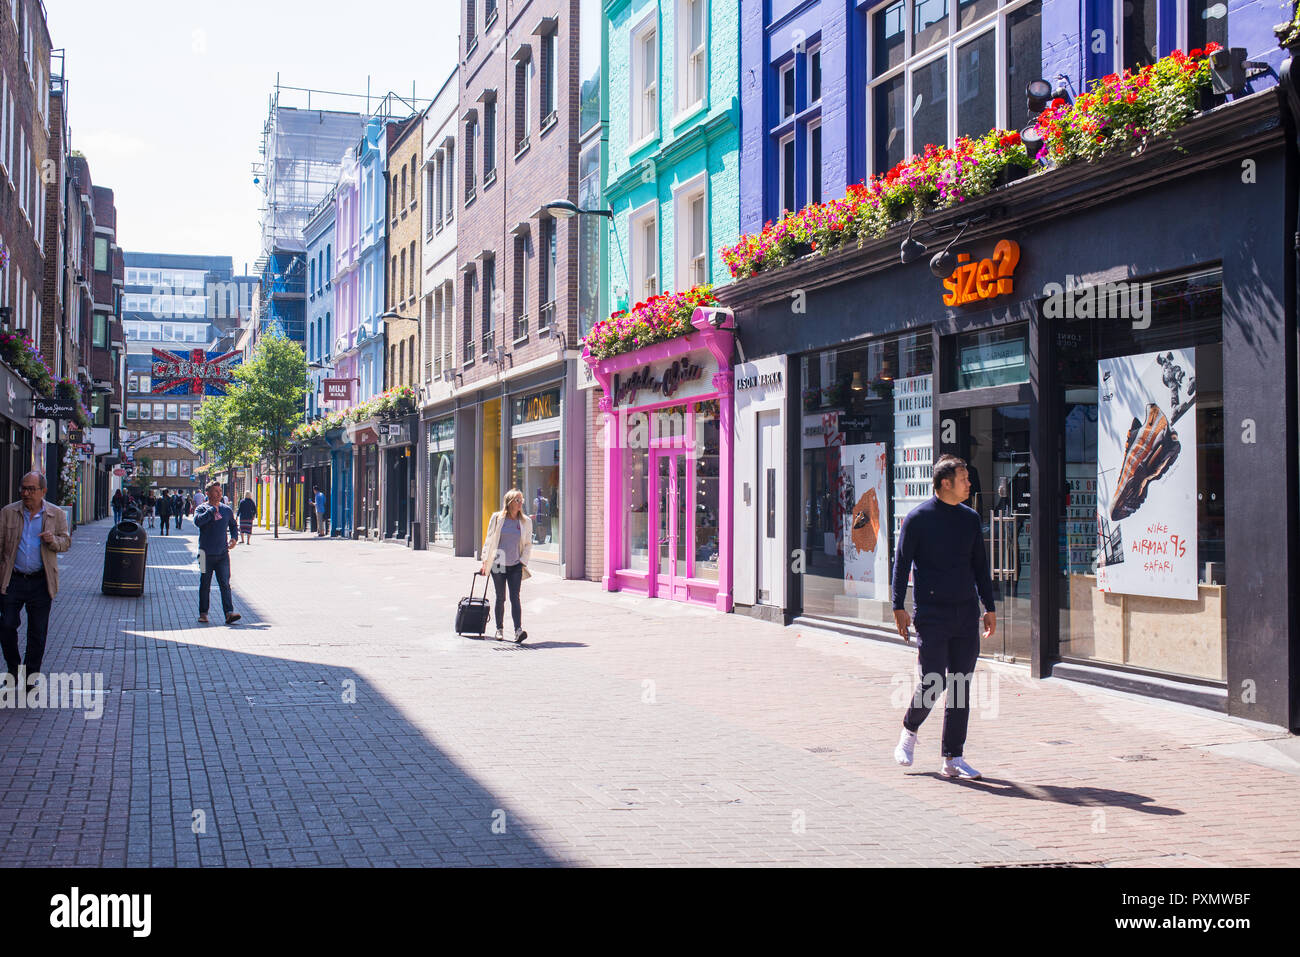 London, England , UK - June 2018: Tourists and people walking and shopping in Carnaby street, London, UK Stock Photo